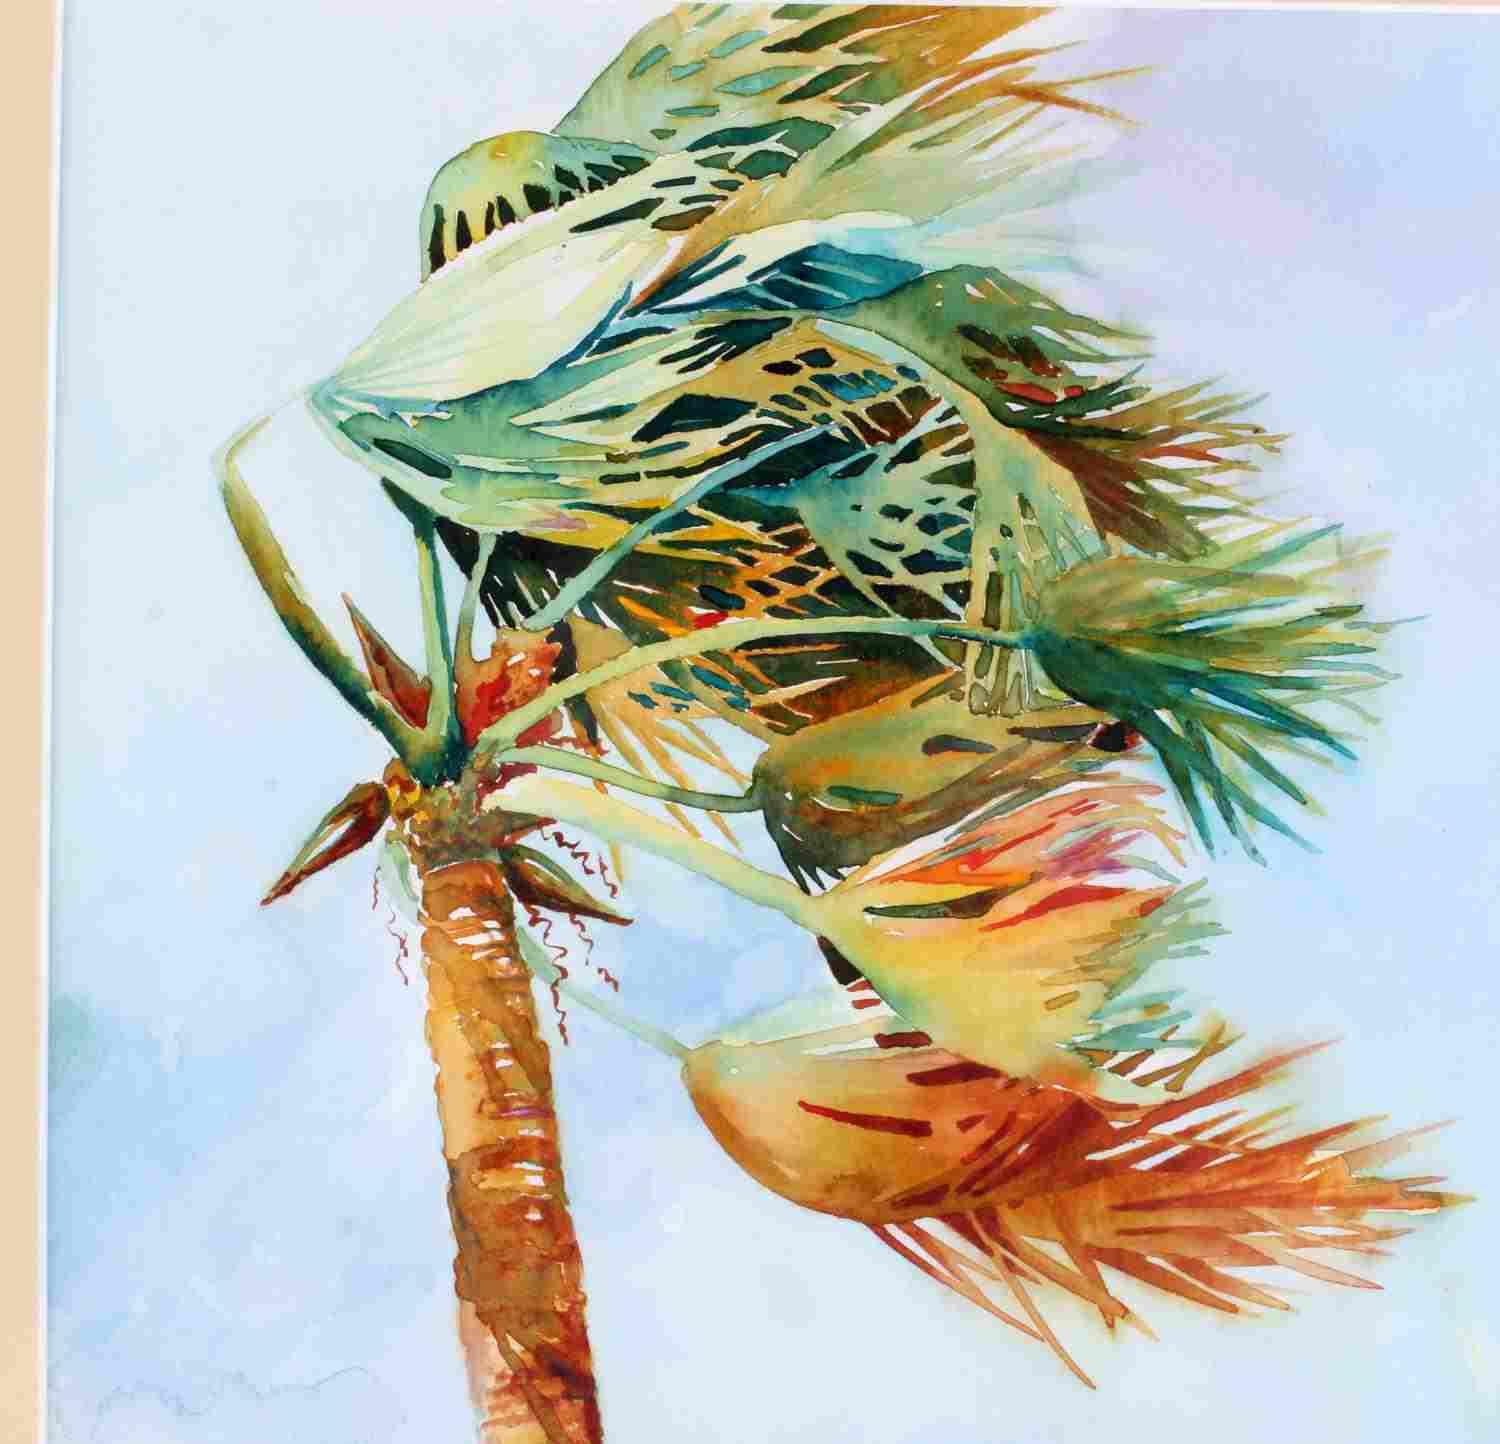 ANNE LEE HEATON WATERCOLOR TROPICAL PALM PAINTING